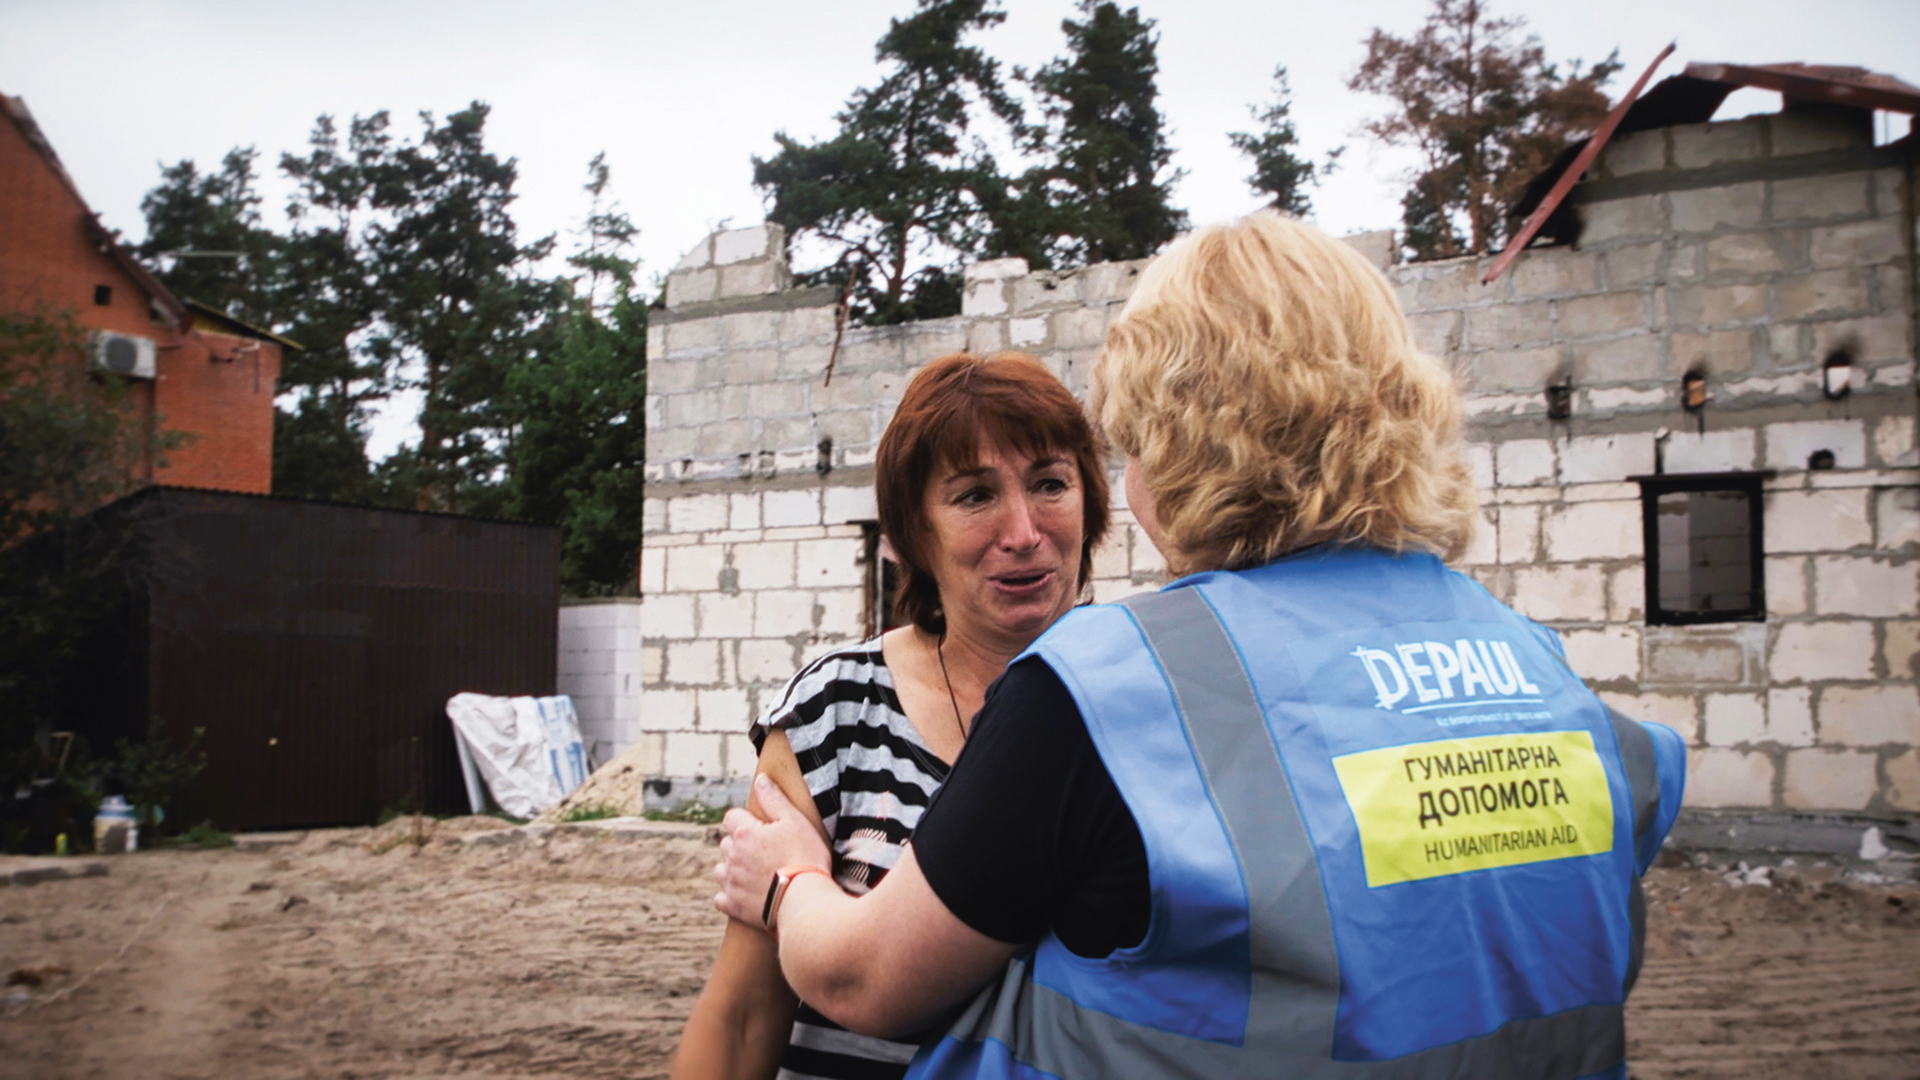 A woman is comforted by a Depaul aid worker amid ruins